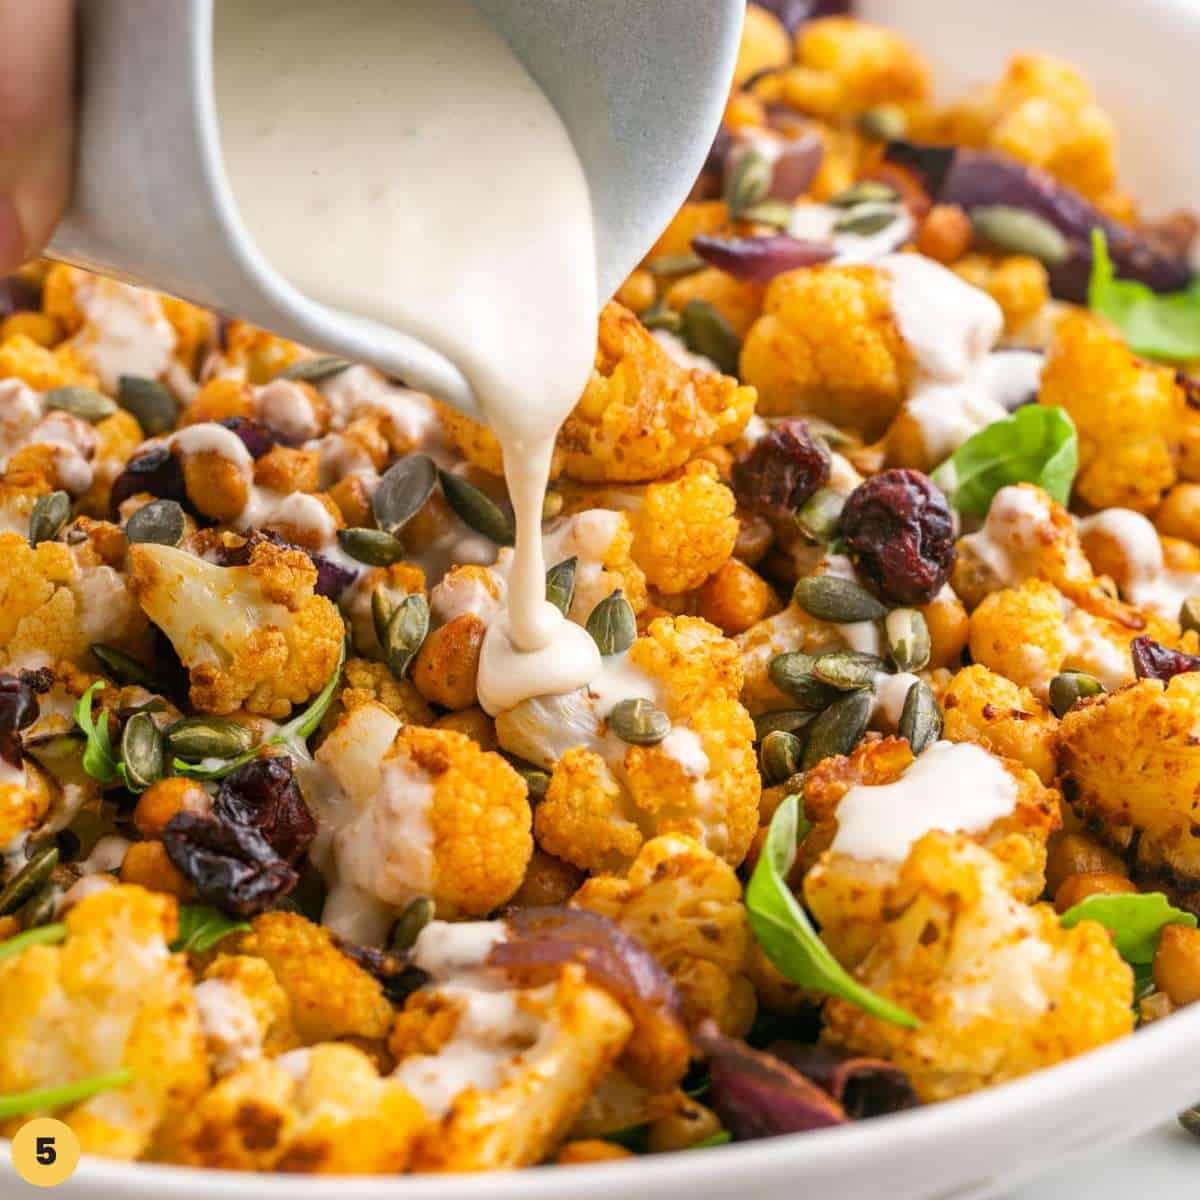 Tahini dressing being drizzle over roasted cauliflower salad